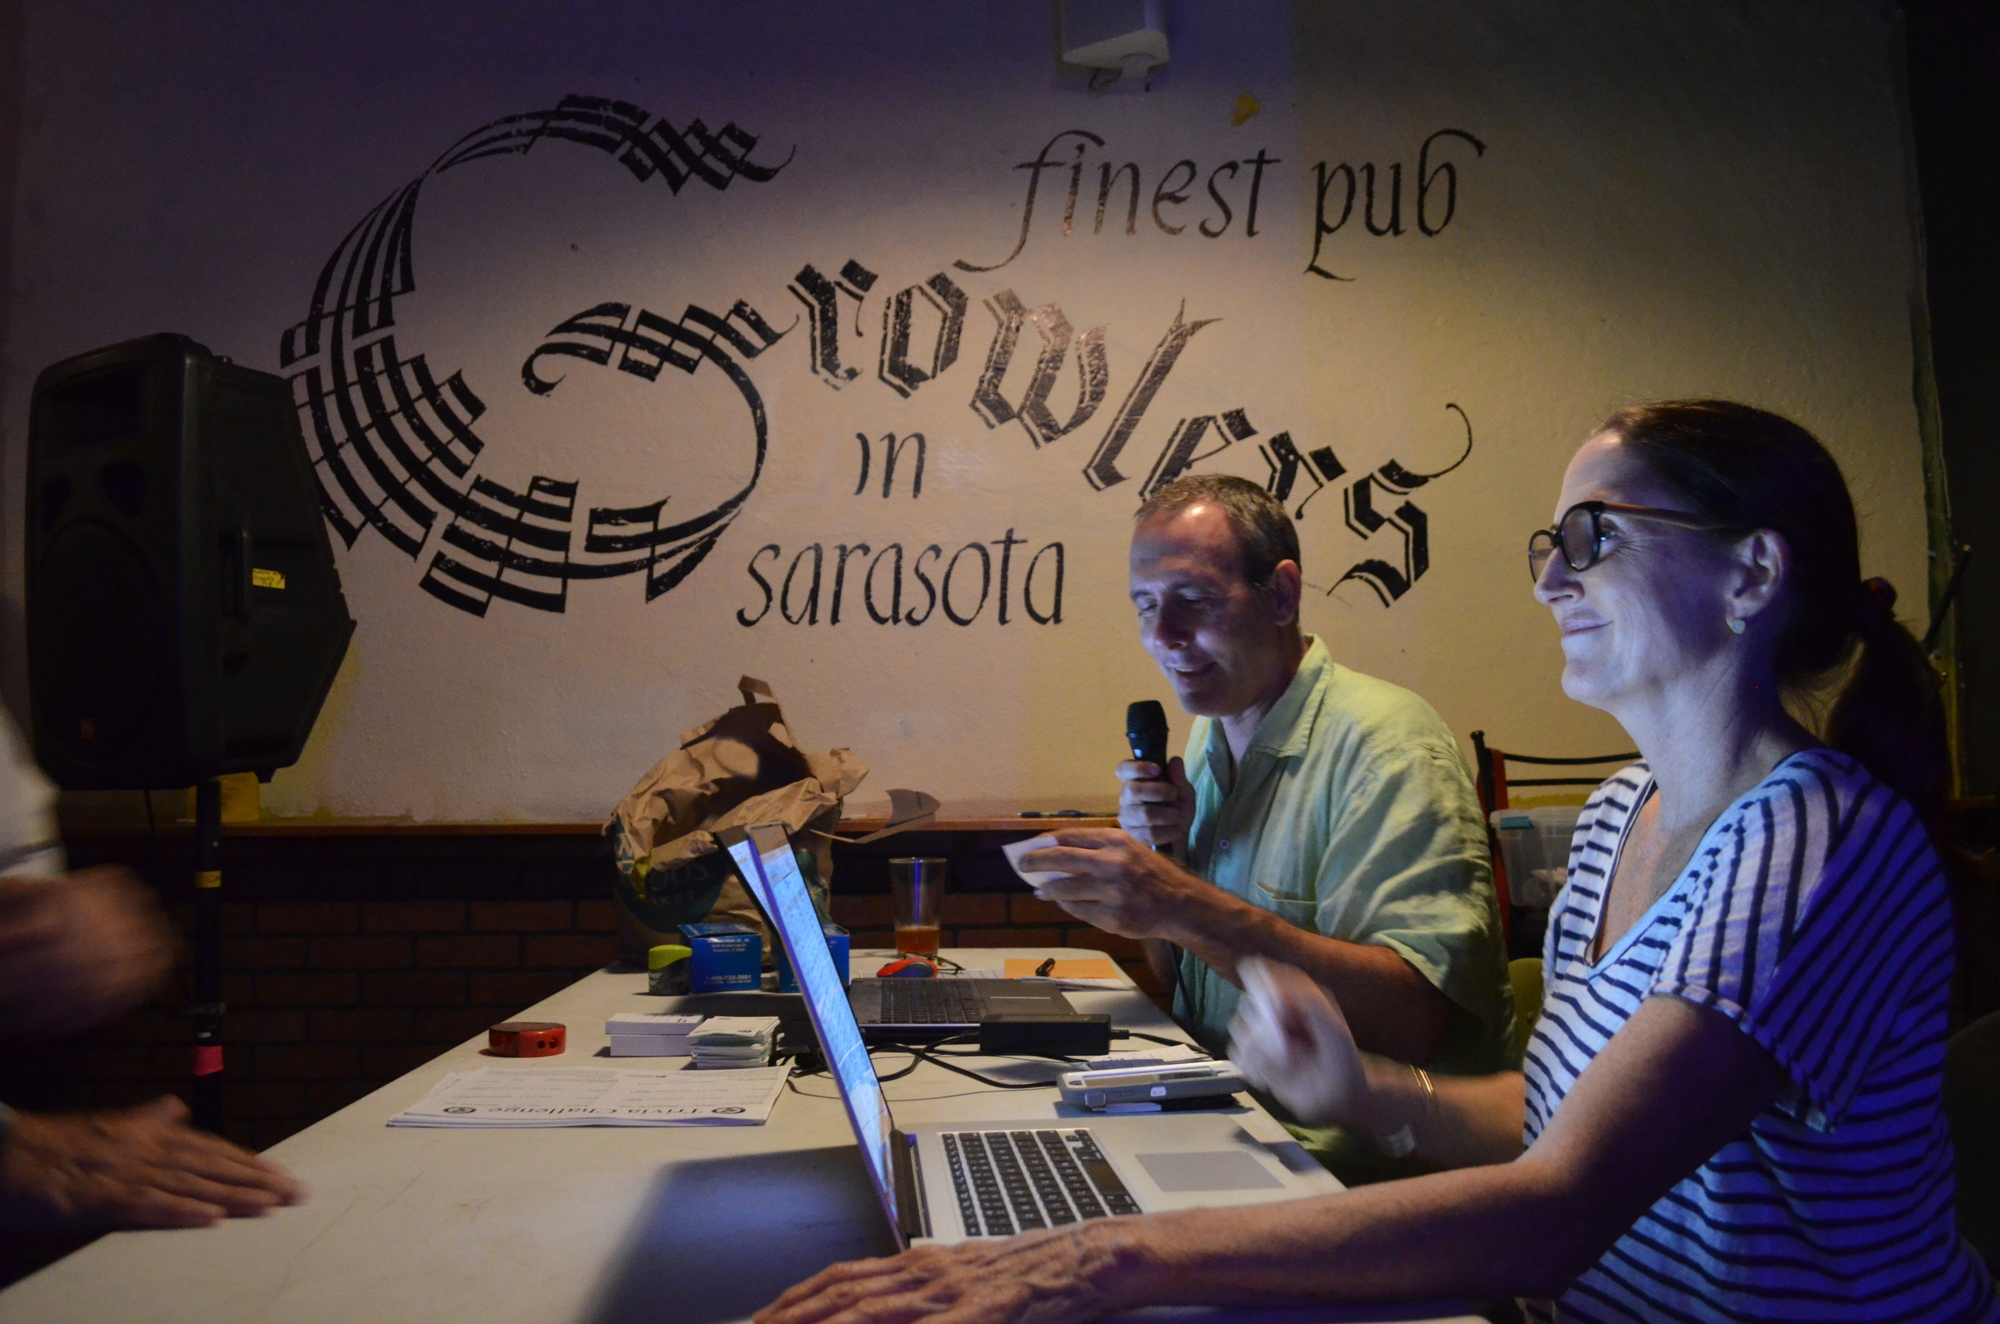 In the days following Hurricane Irma, Growler's Pub has become a place for neighborhood residents to enlist and offer help, as well as find a sense of normalcy.